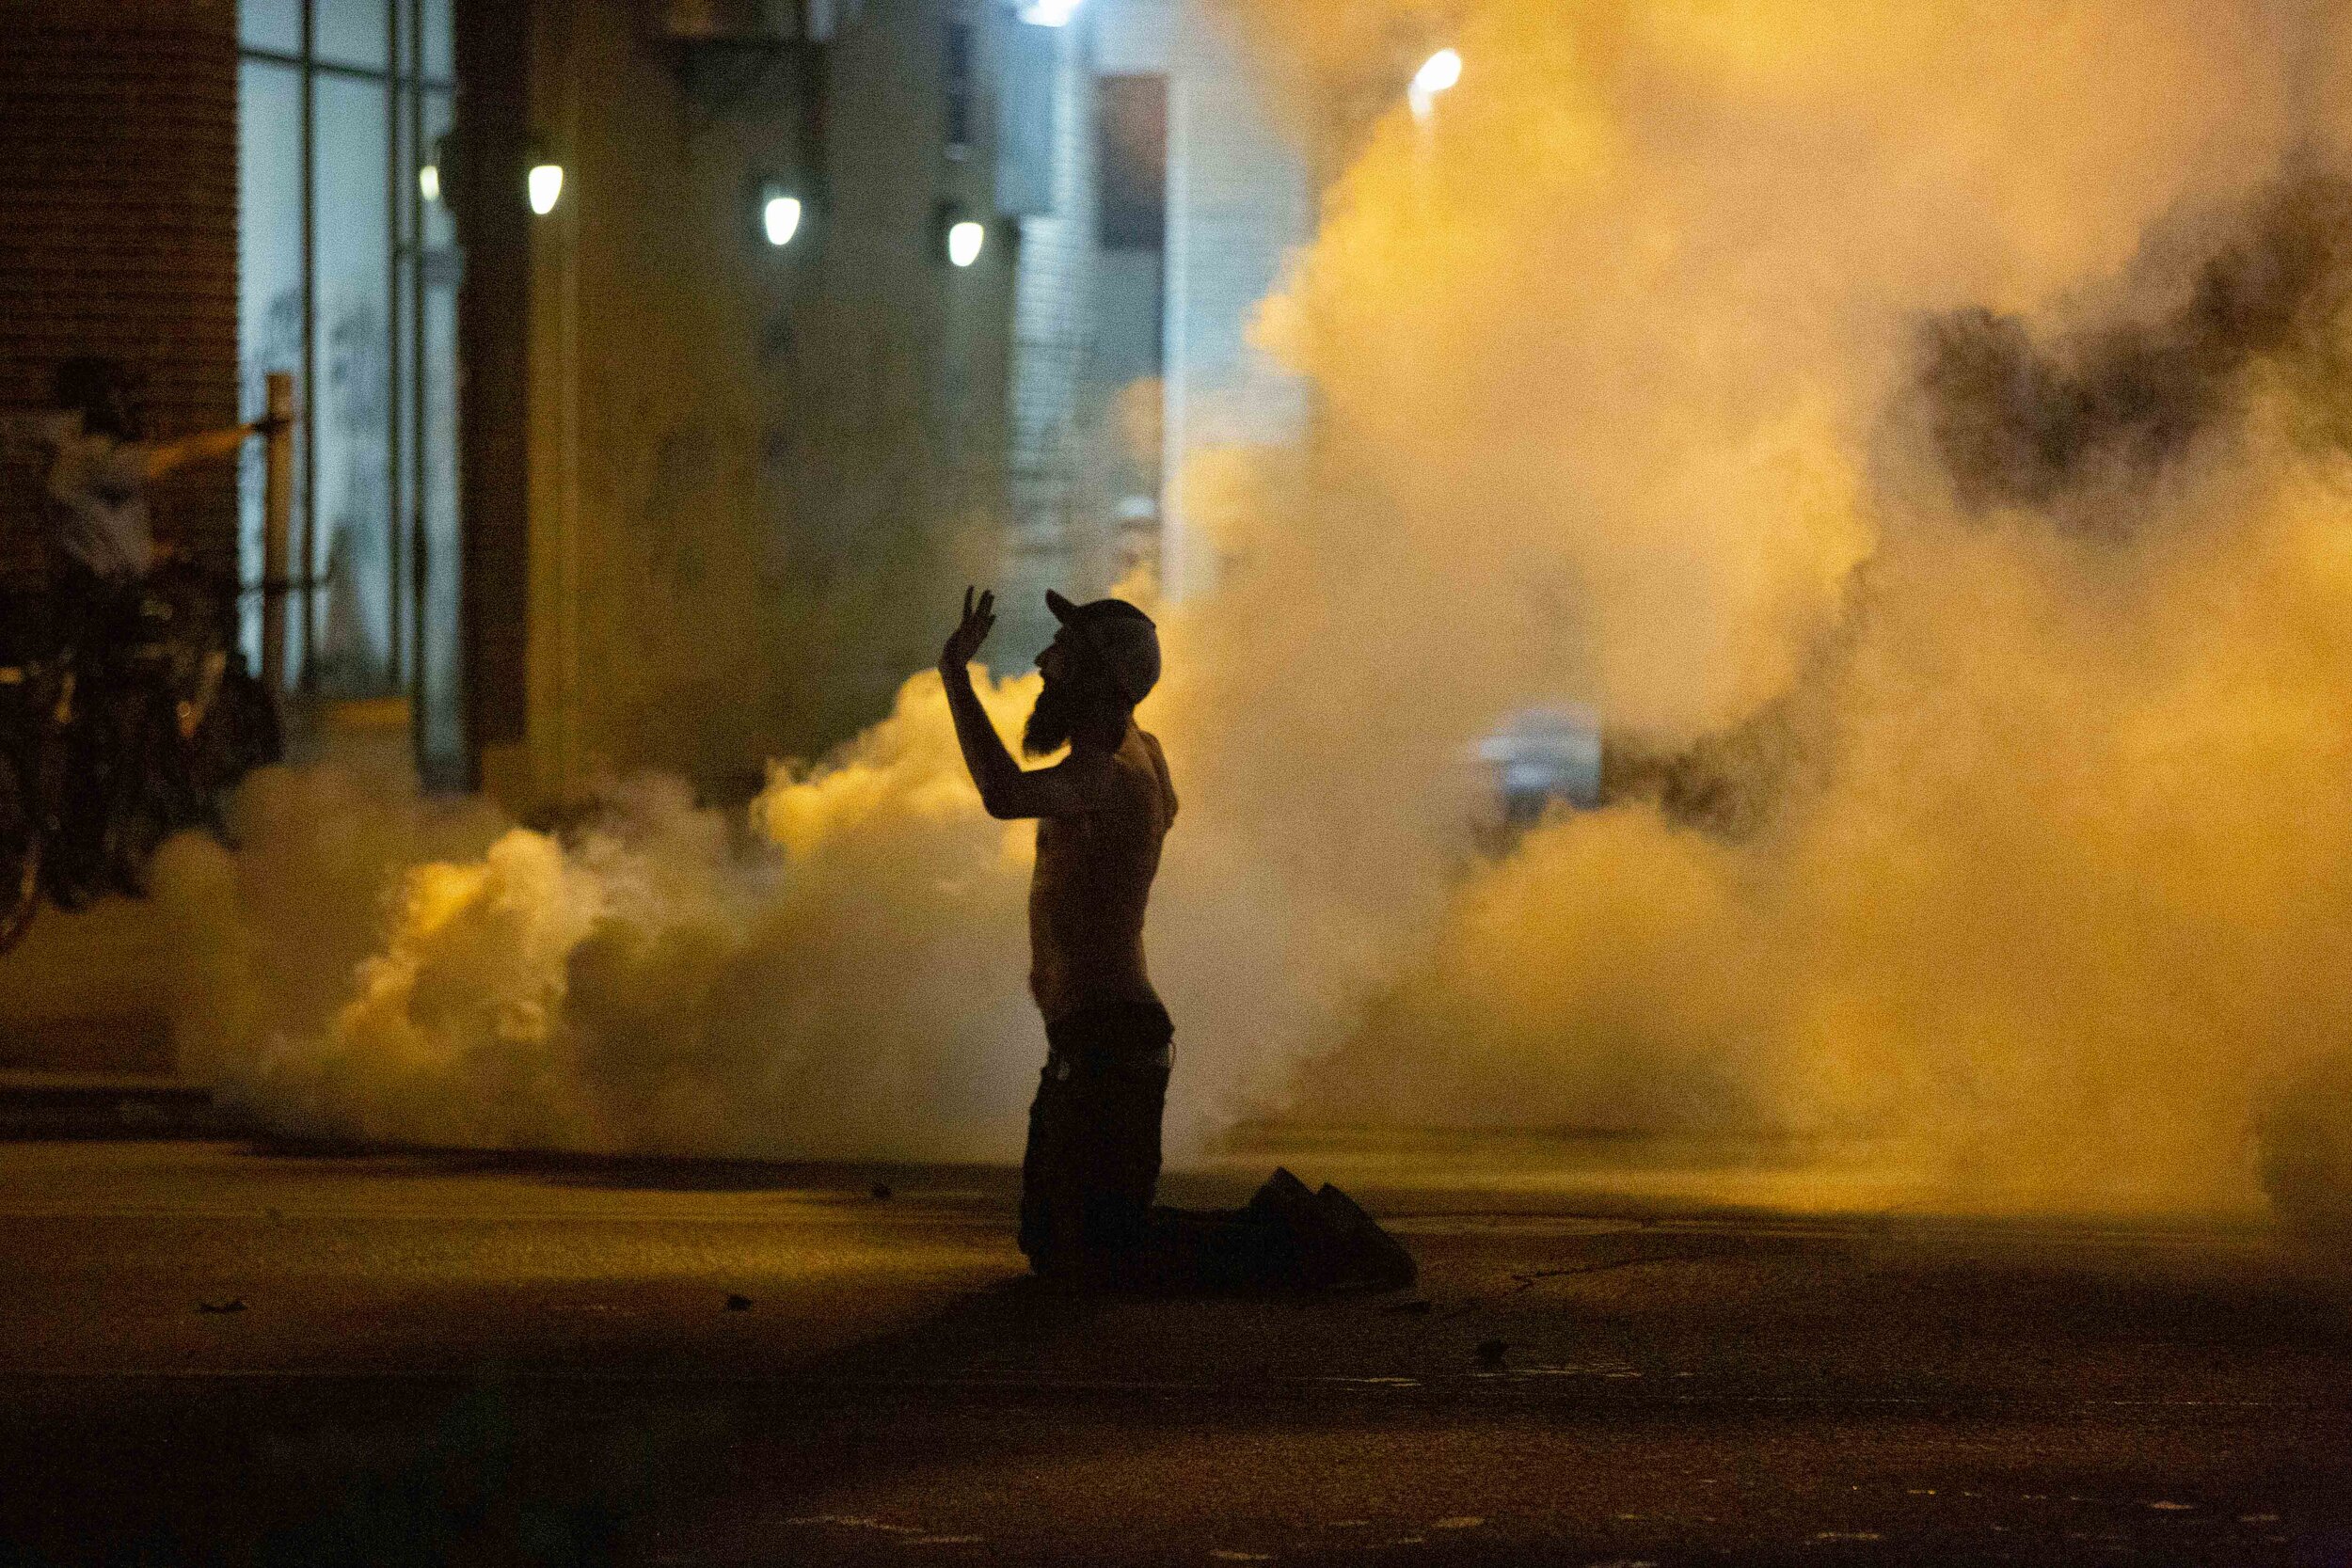  A protester holds his hands up in front of a police line as tear gas goes off around him during the second night of protest over the police killing of George Floyd in Minneapolis, Minnesota on May 27, 2020. 